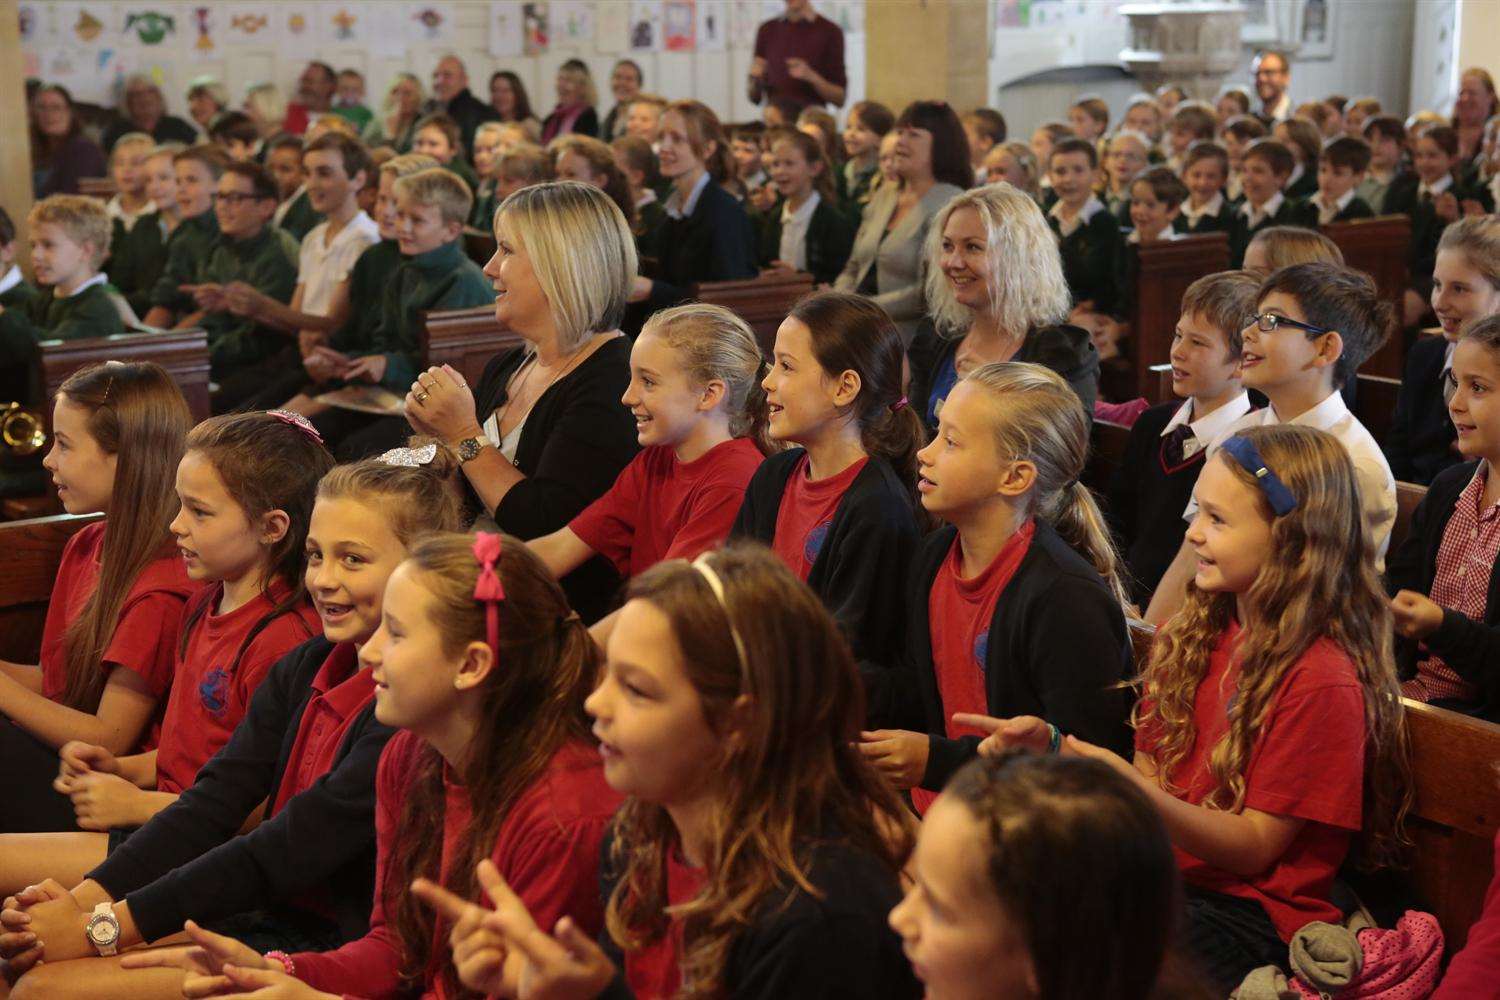 Local schoolchildren attend a concert by the English National Ballet as part of the Music@Malling festival